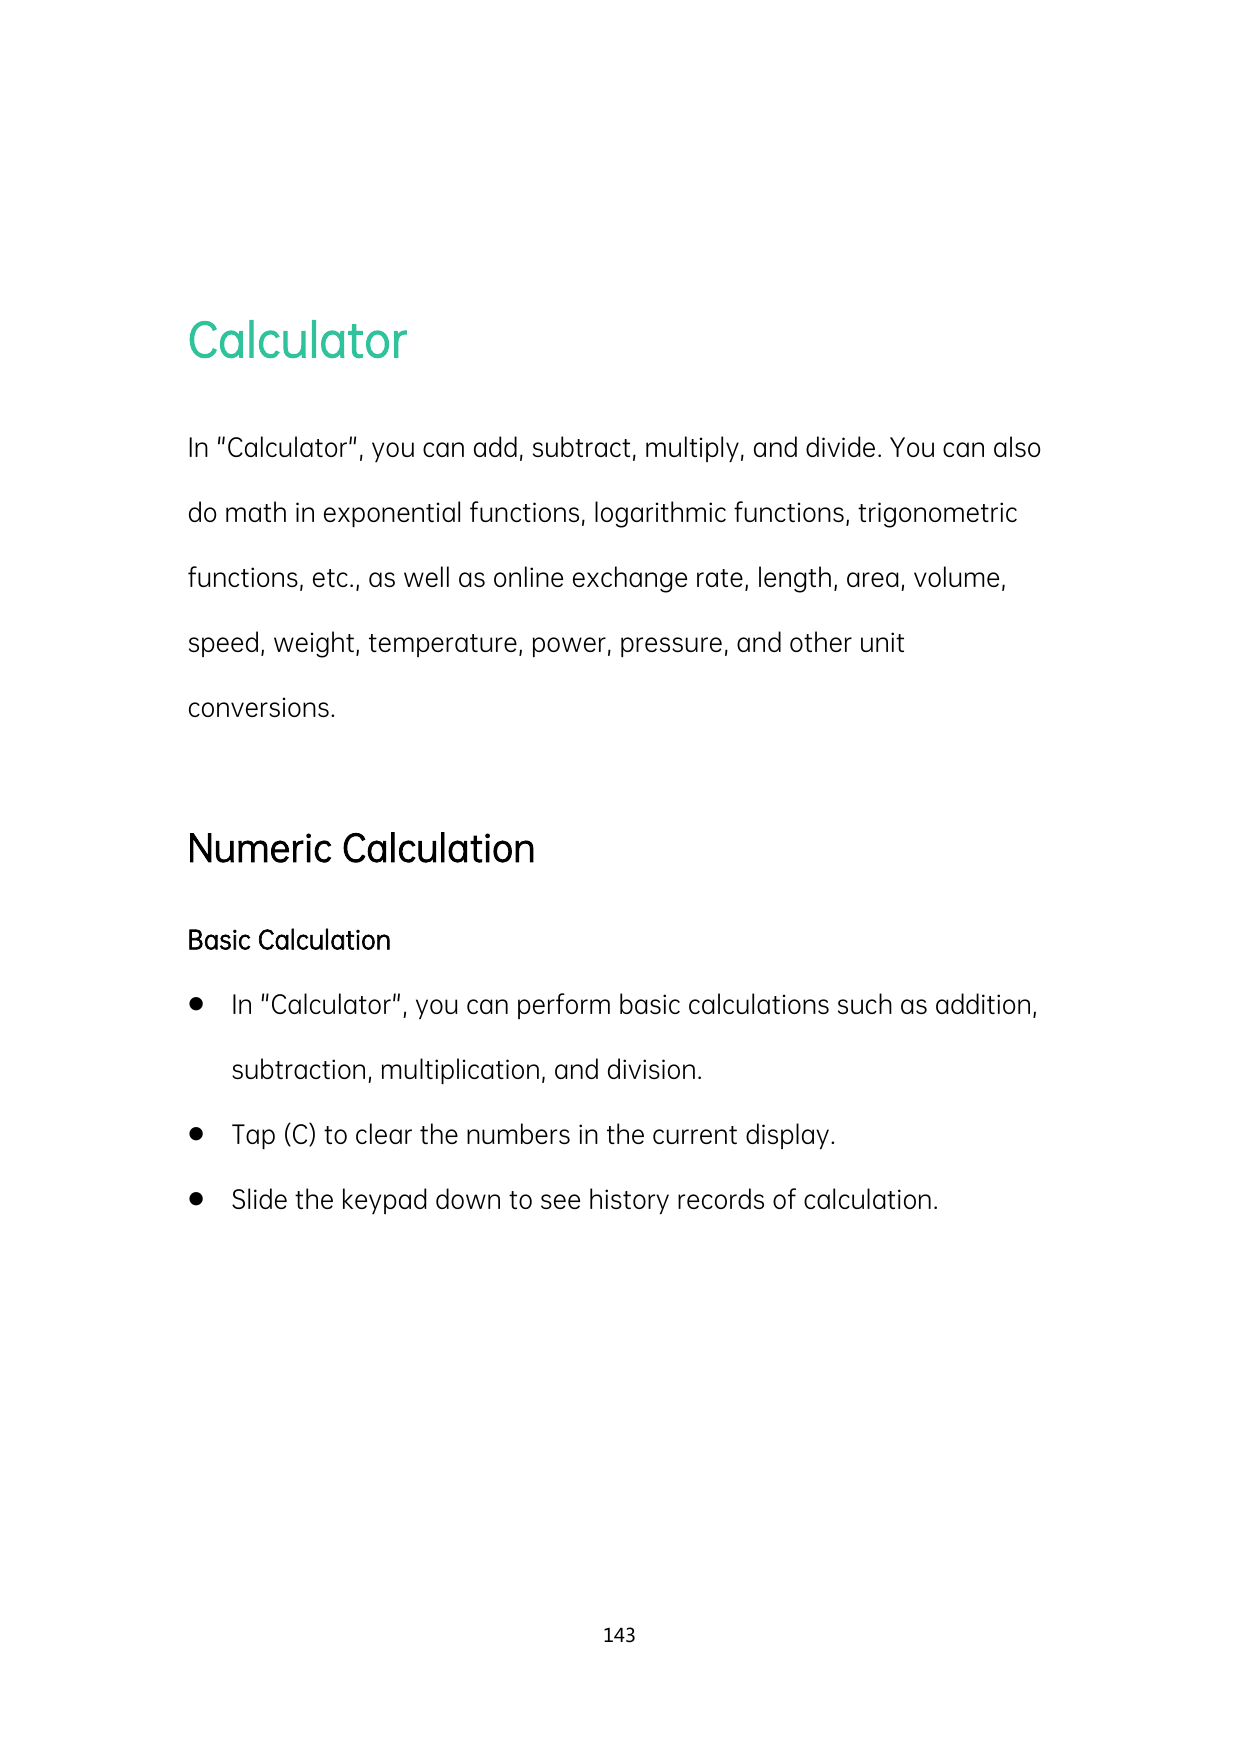 CalculatorIn "Calculator", you can add, subtract, multiply, and divide. You can alsodo math in exponential functions, logarithmi